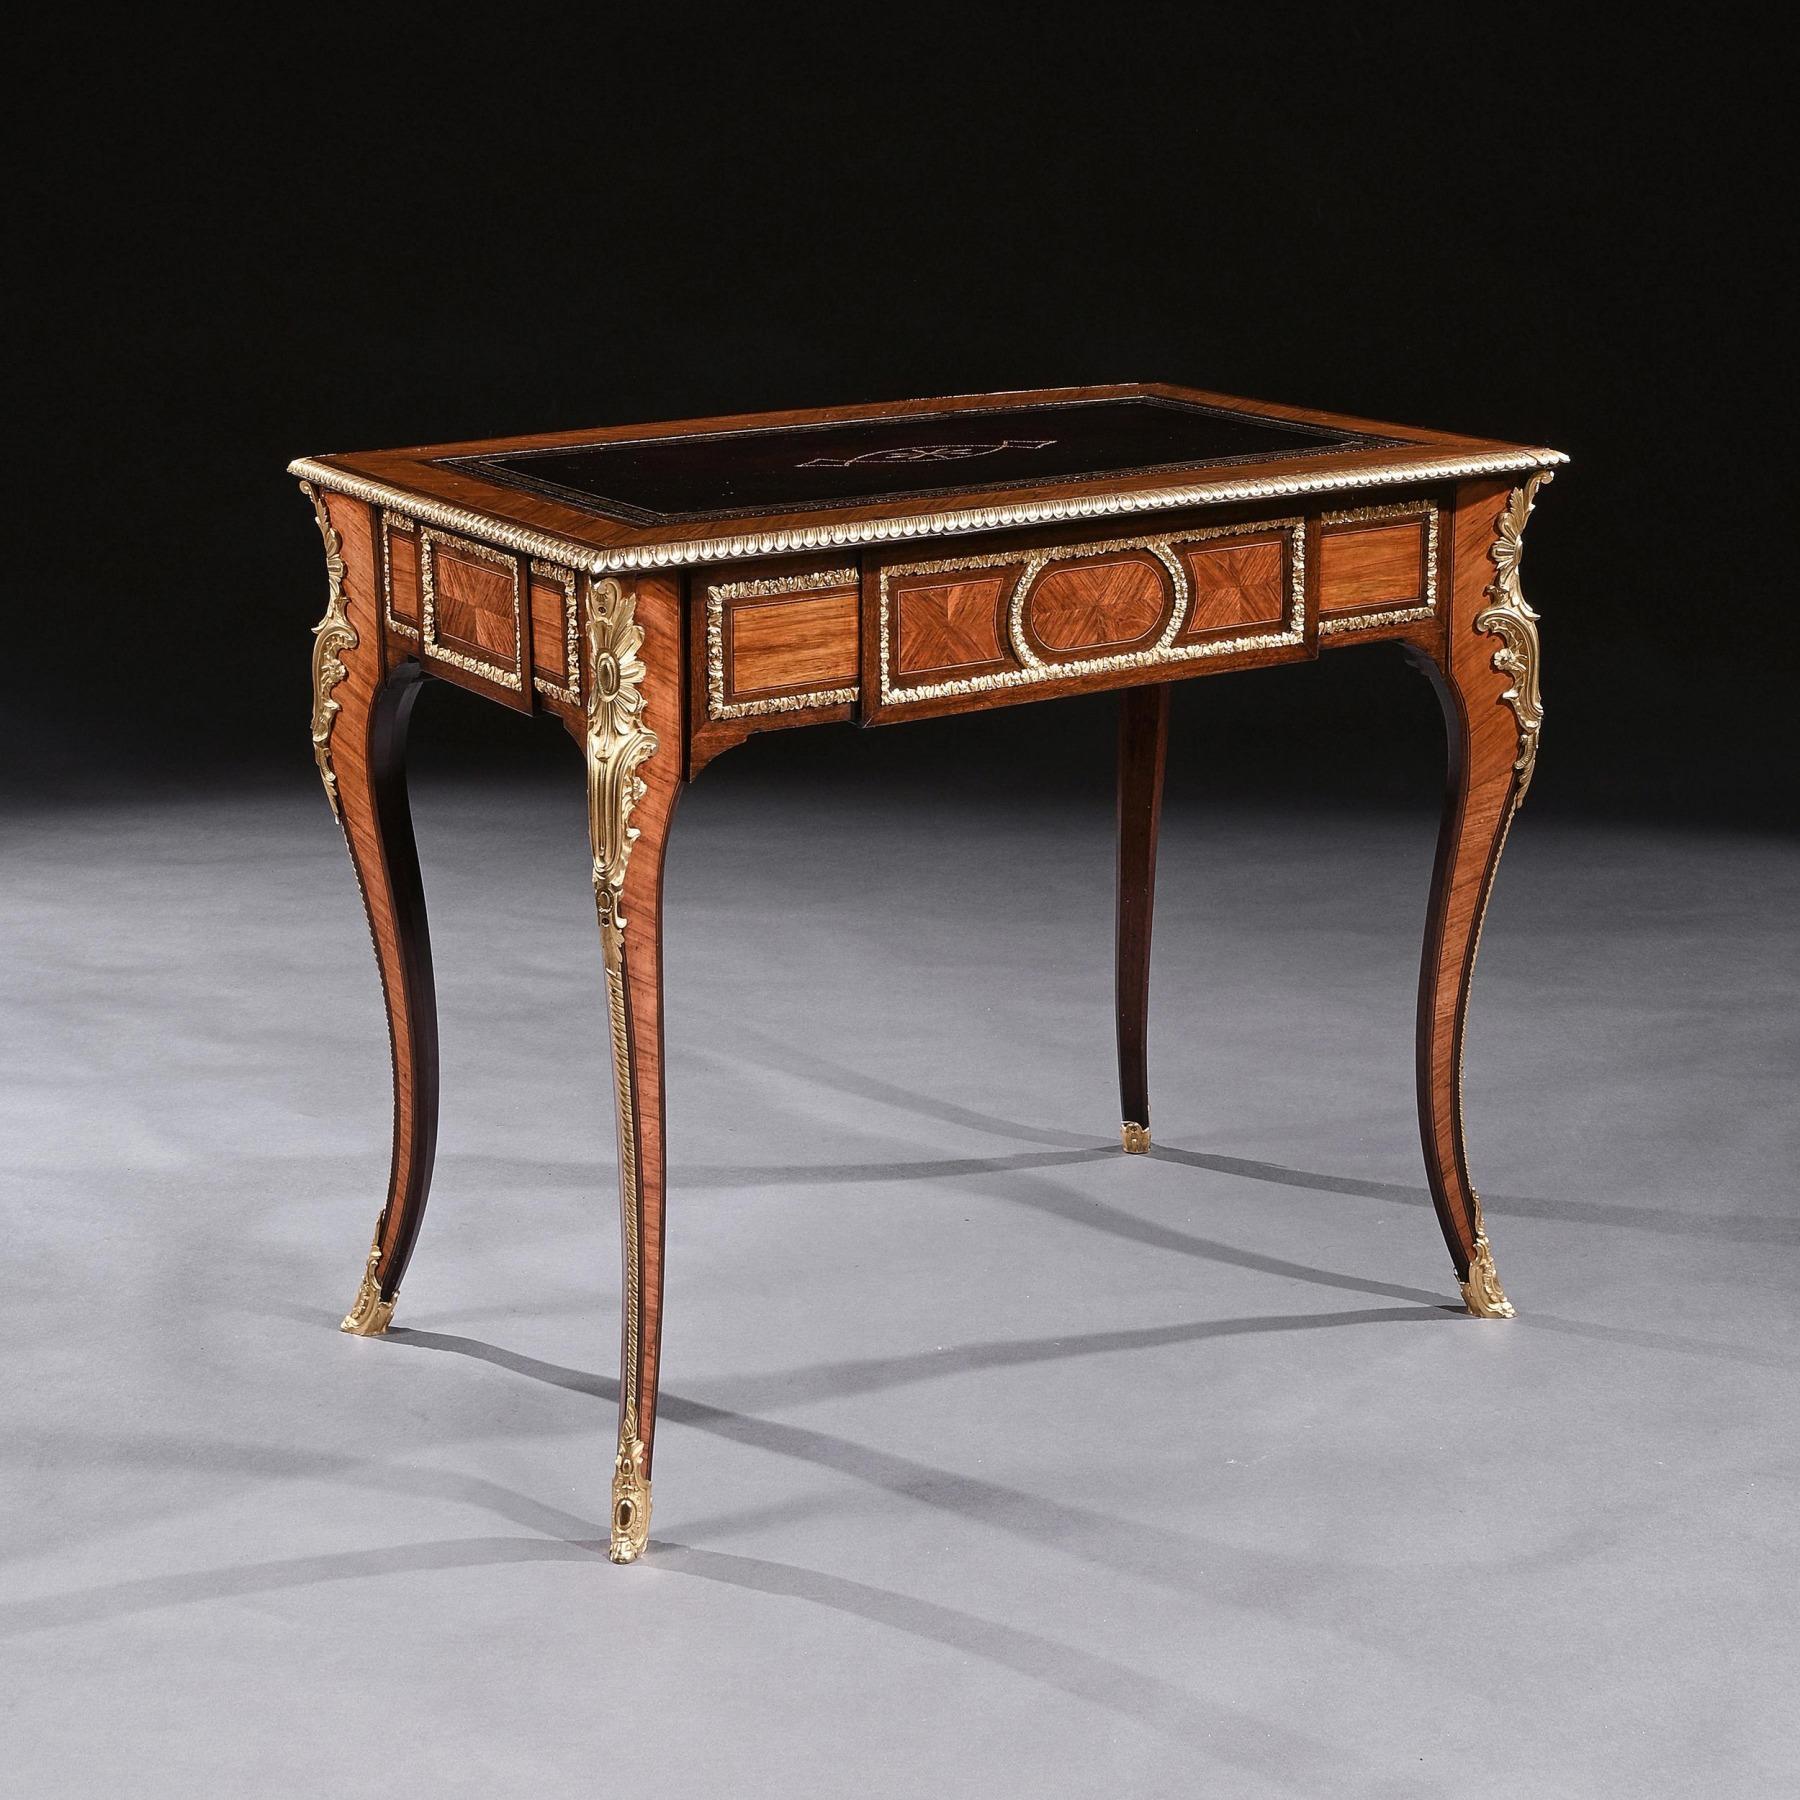 An extremely fine 19th century French Louis XV Revival gilt ormolu mounted Kingwood bureau de dame / writing table. 

French, circa 1870.

A very attractive and of the finest quality Kingwood bureau de dame or ladies writing table. 

The